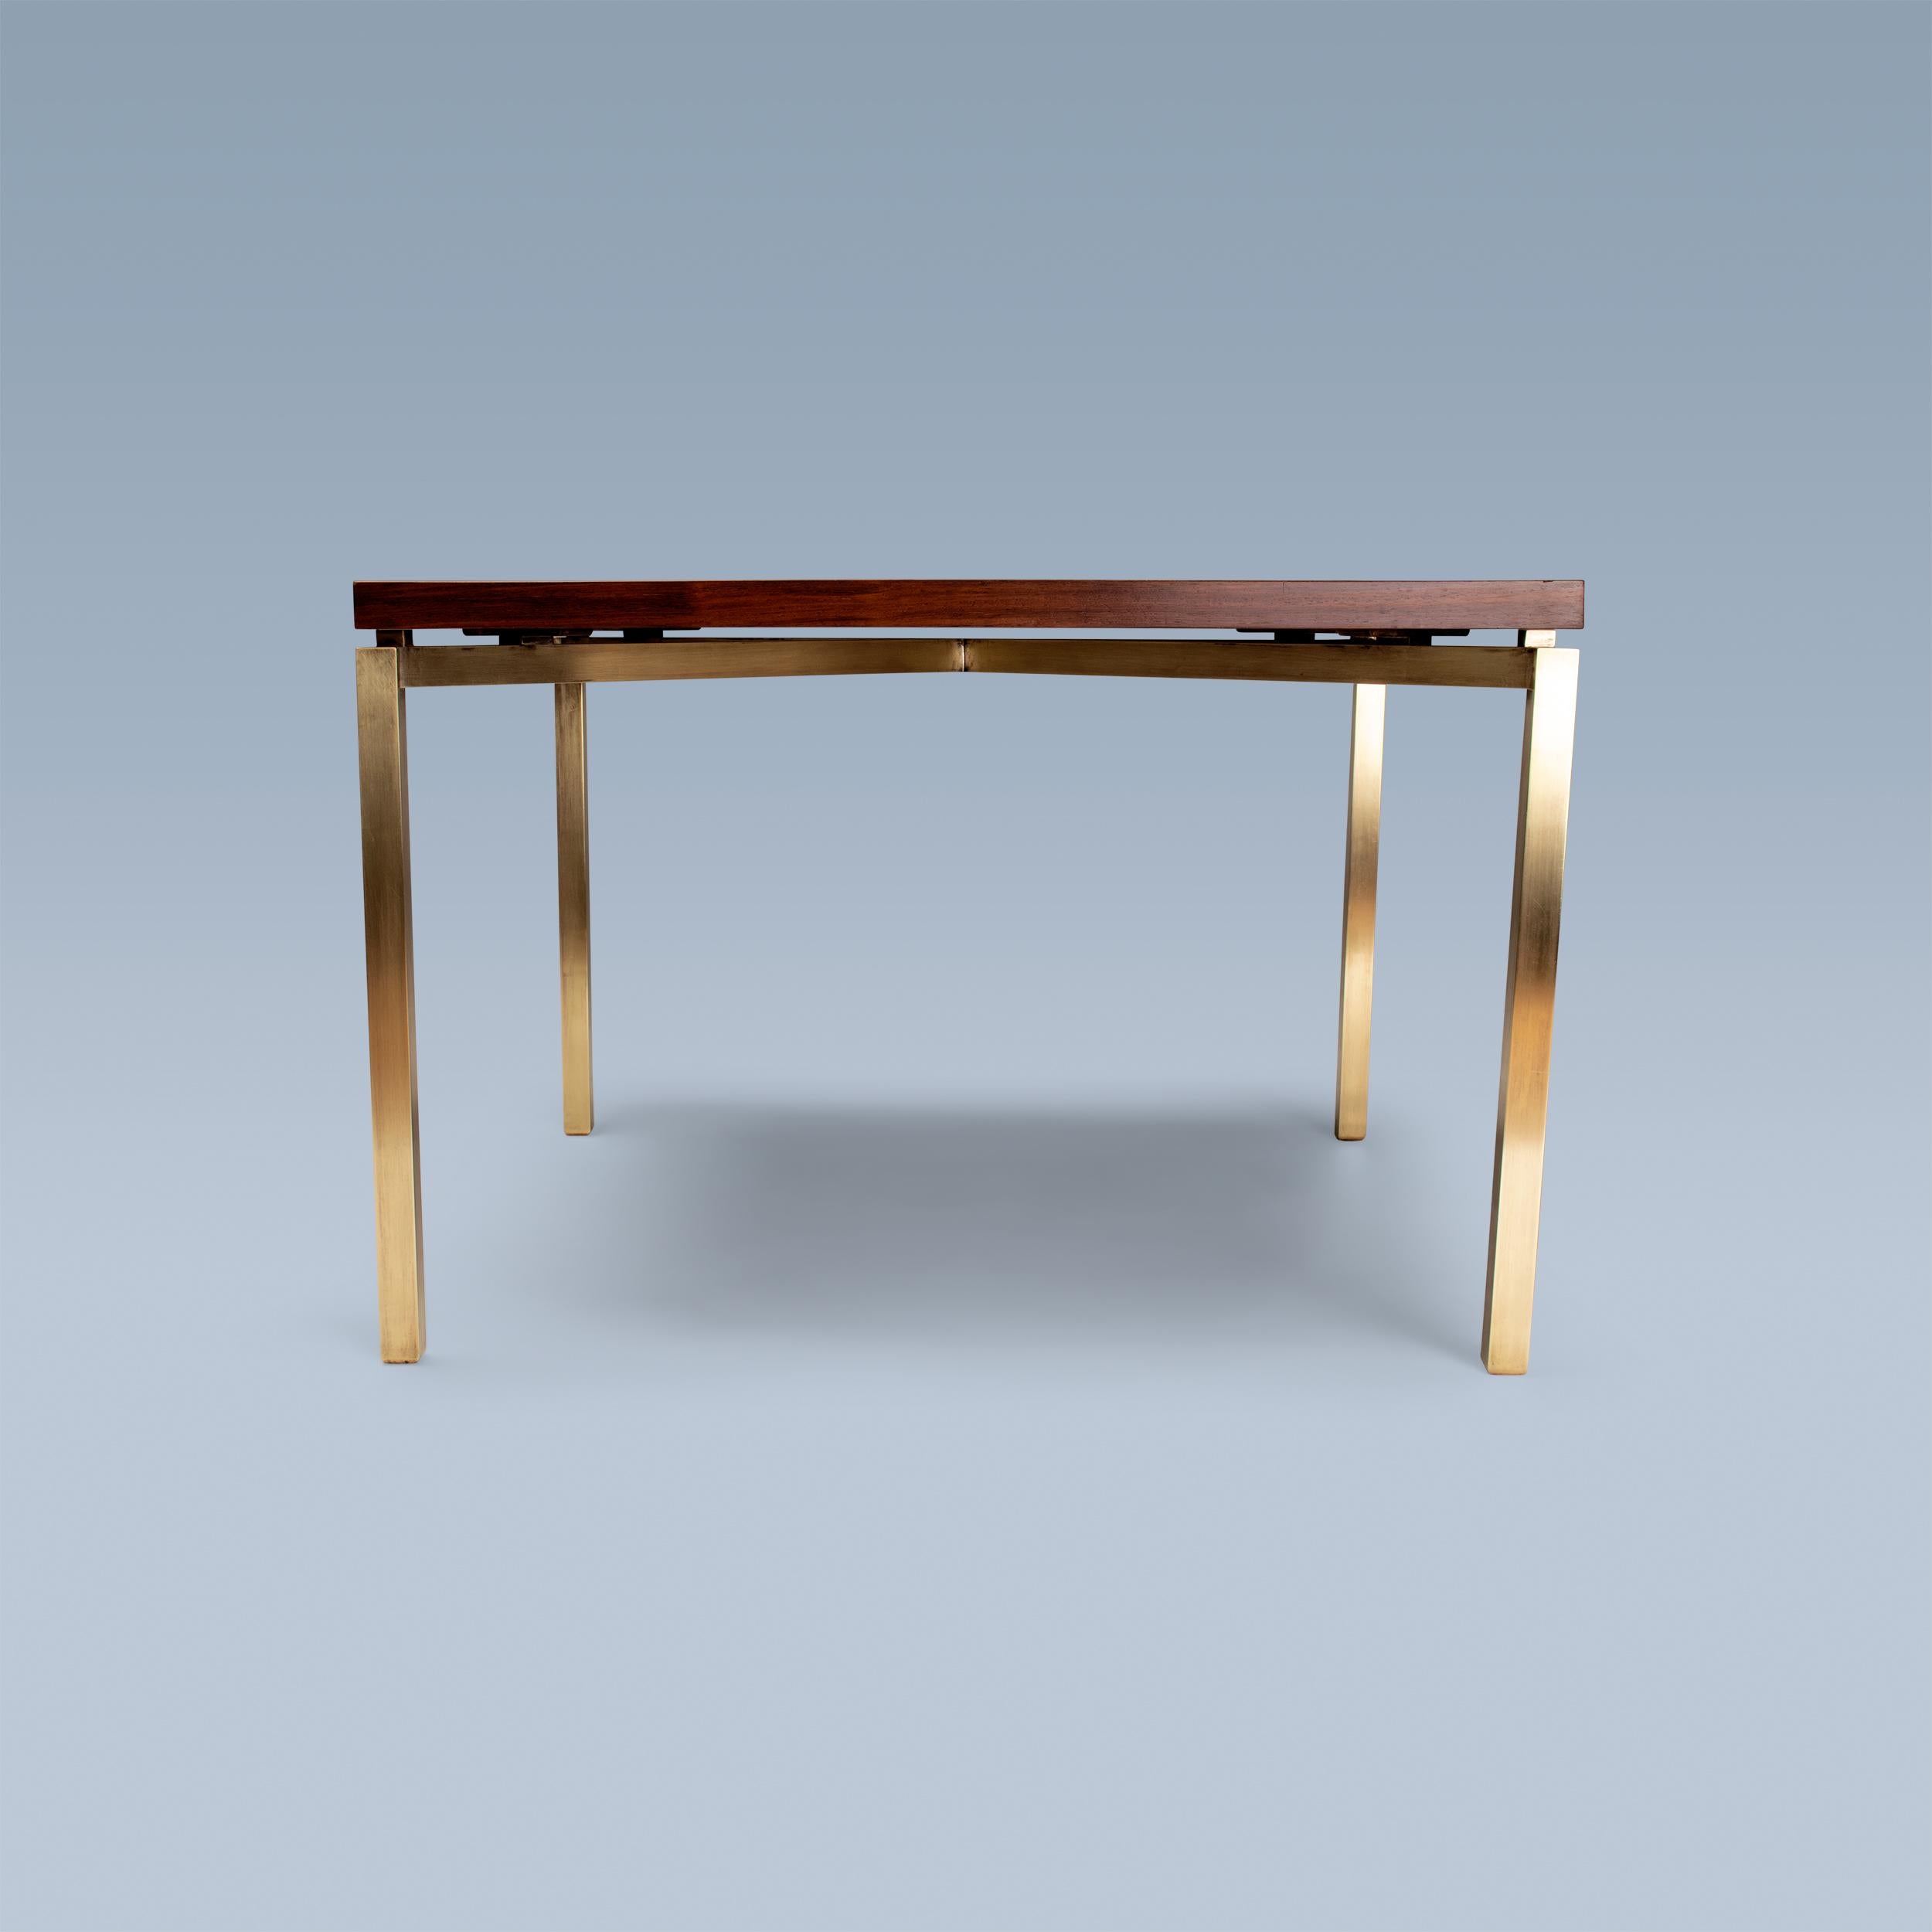 This square table by Danish multi-artist Bjørn Wiinblad (1918-2006) has a total of no less than 196 handpainted tiles on top. The tabletop frame is made from wenge and the legs are brass.

It was designed and executed in 1960 for luxury department